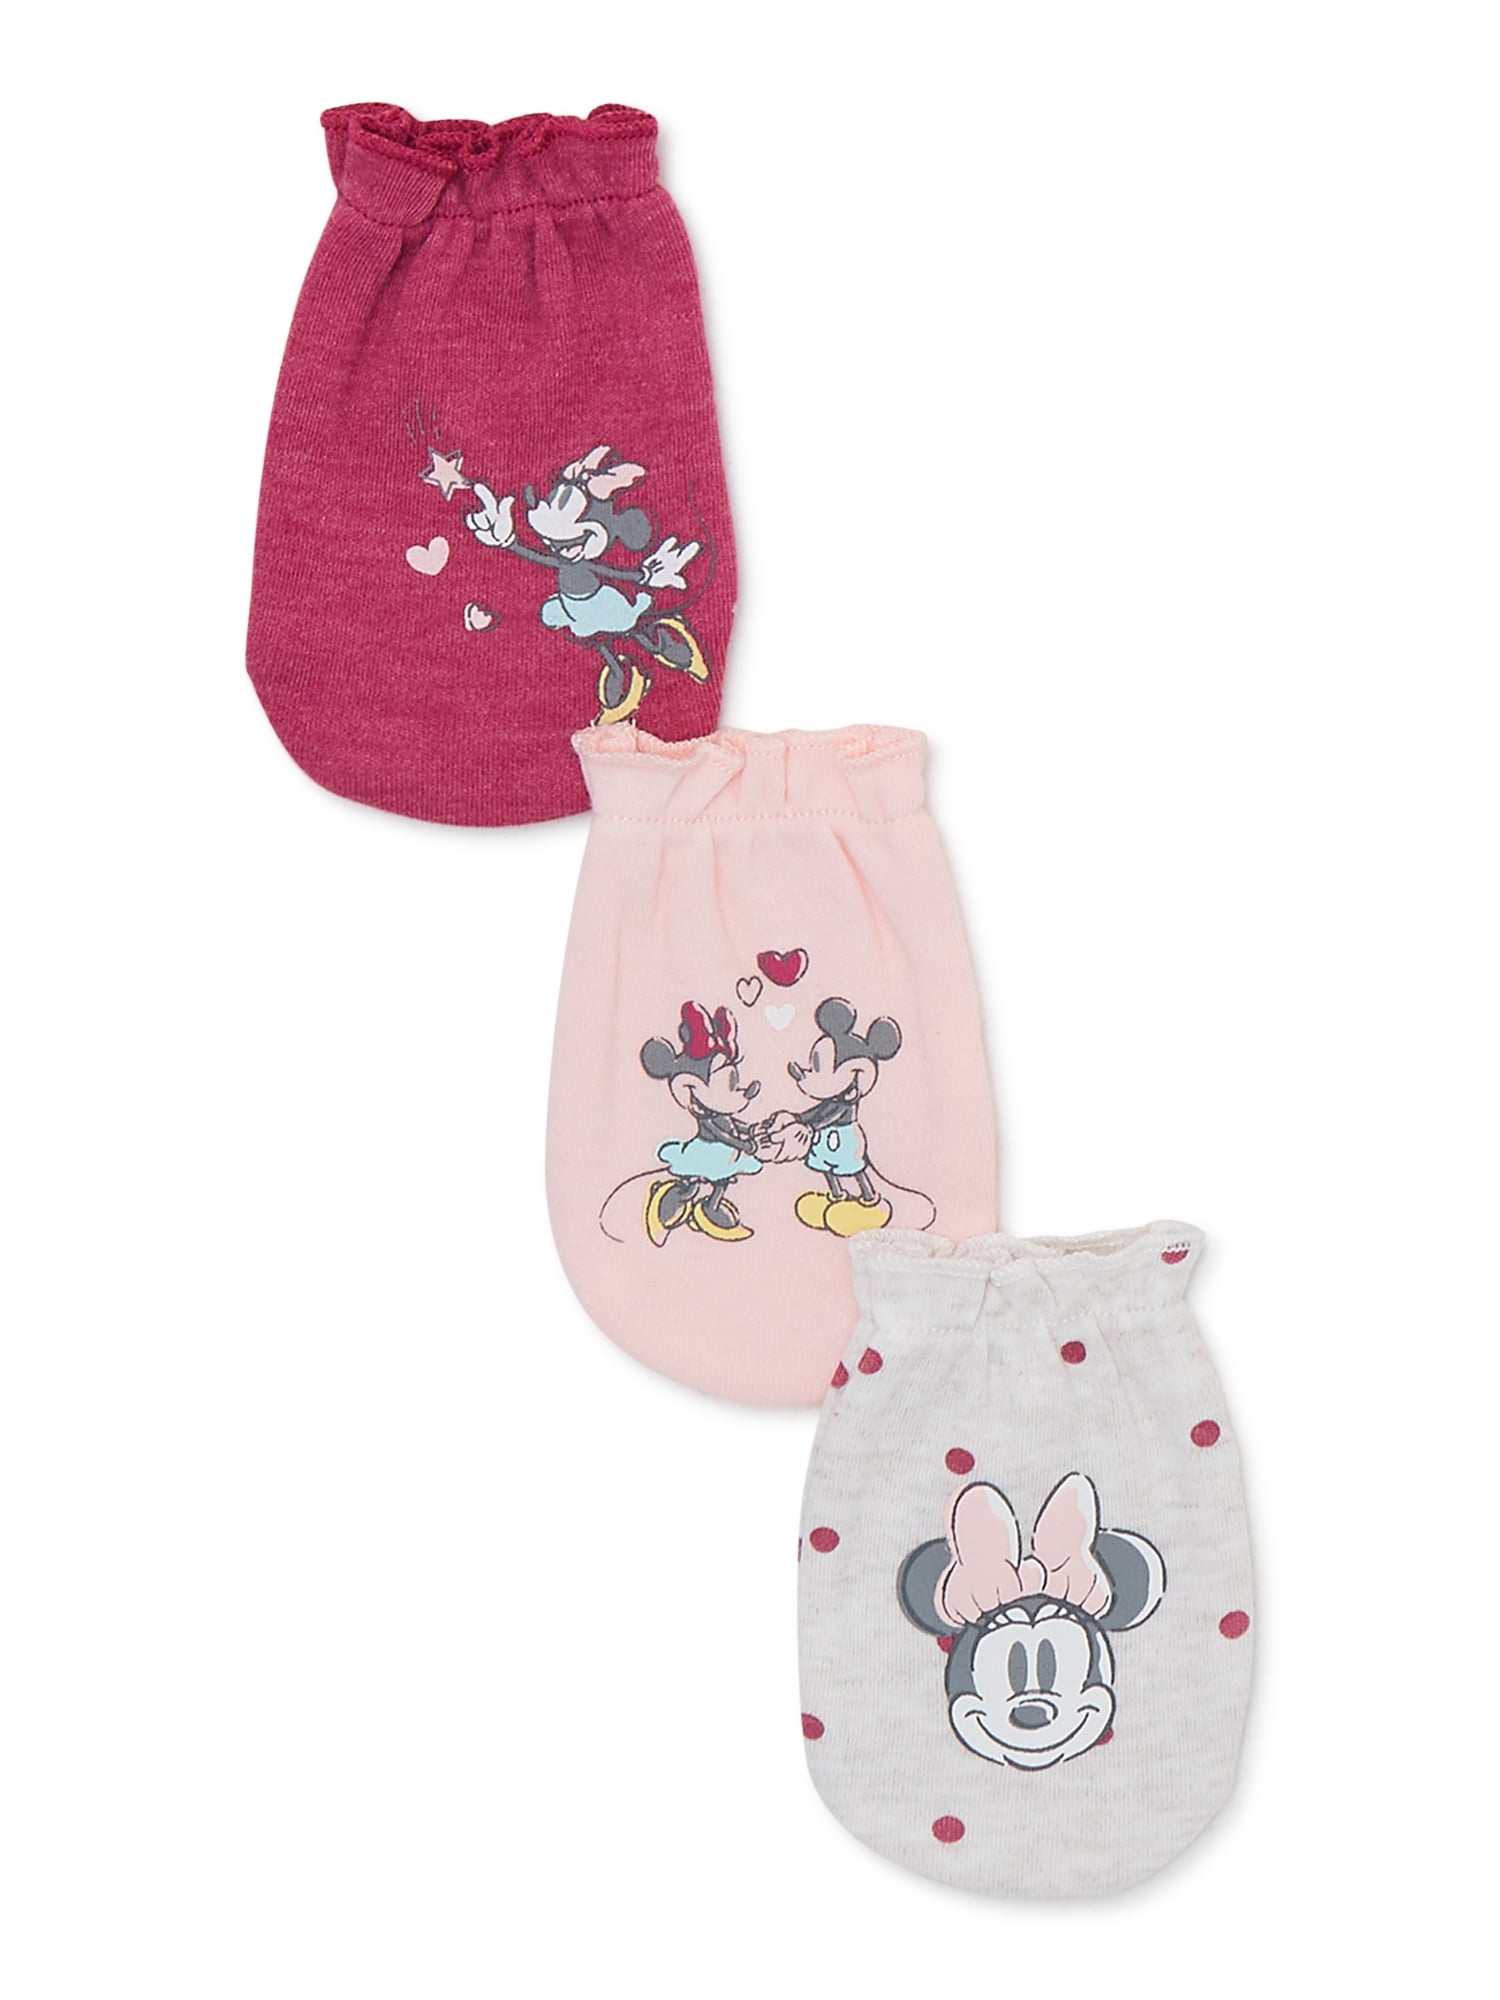 Disney Baby Wishes + Dreams Minnie Mouse Baby Boys and Girls Unisex Mittens Caps